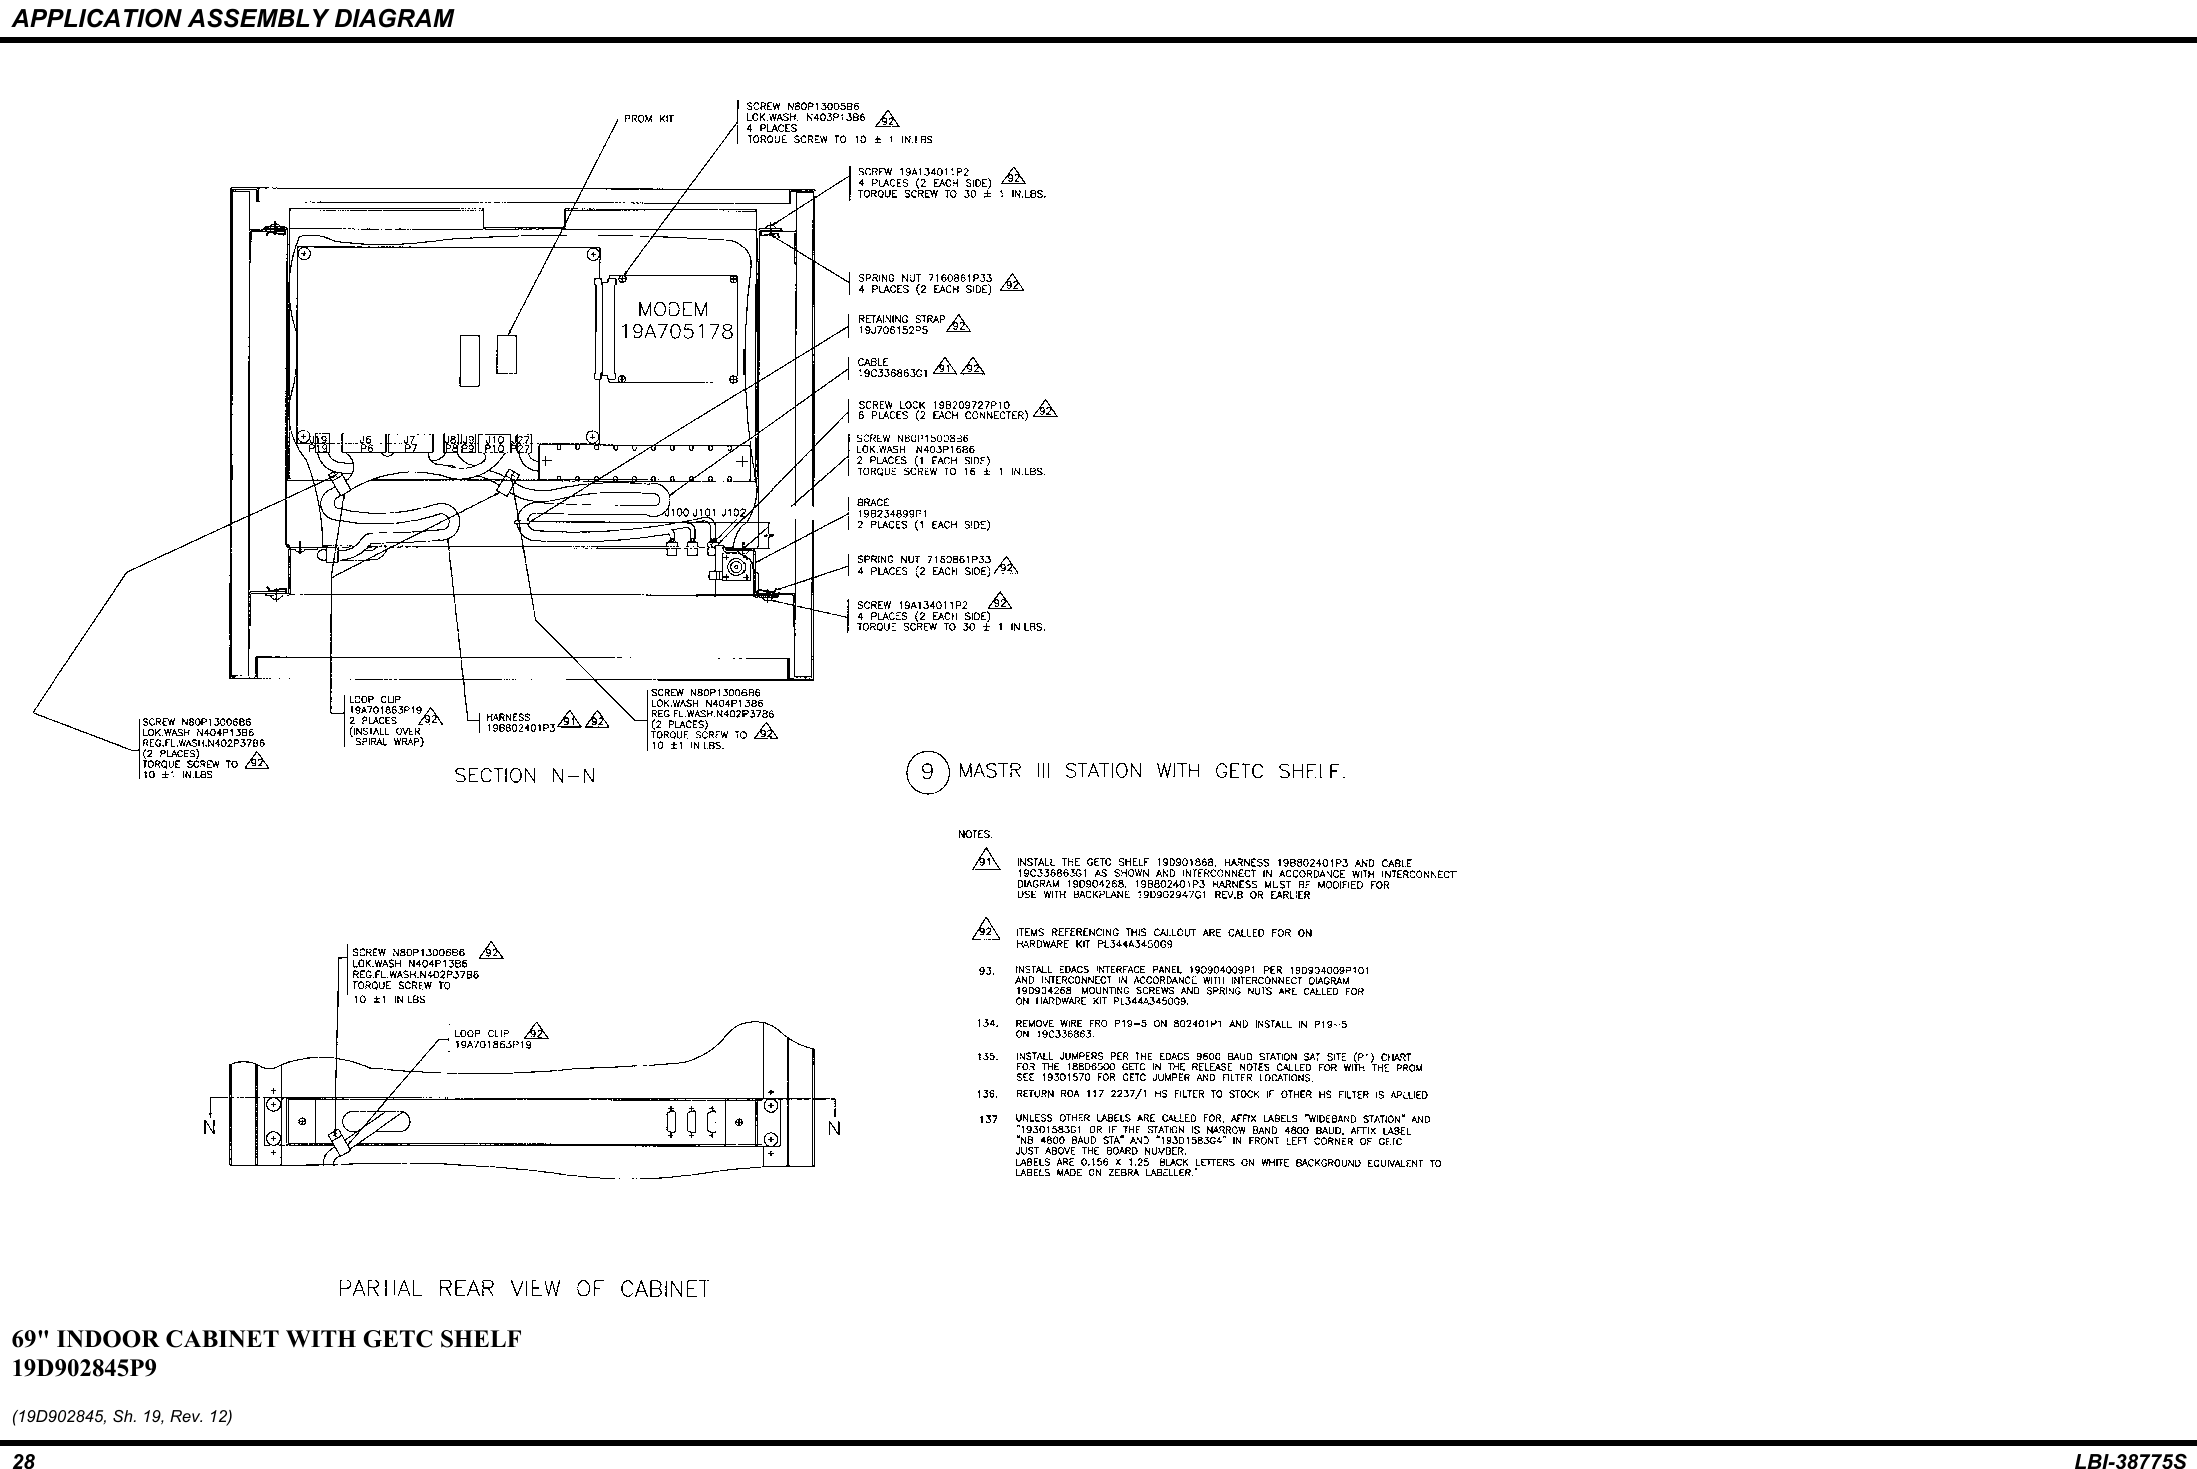 APPLICATION ASSEMBLY DIAGRAM28 LBI-38775S69&quot; INDOOR CABINET WITH GETC SHELF19D902845P9(19D902845, Sh. 19, Rev. 12)